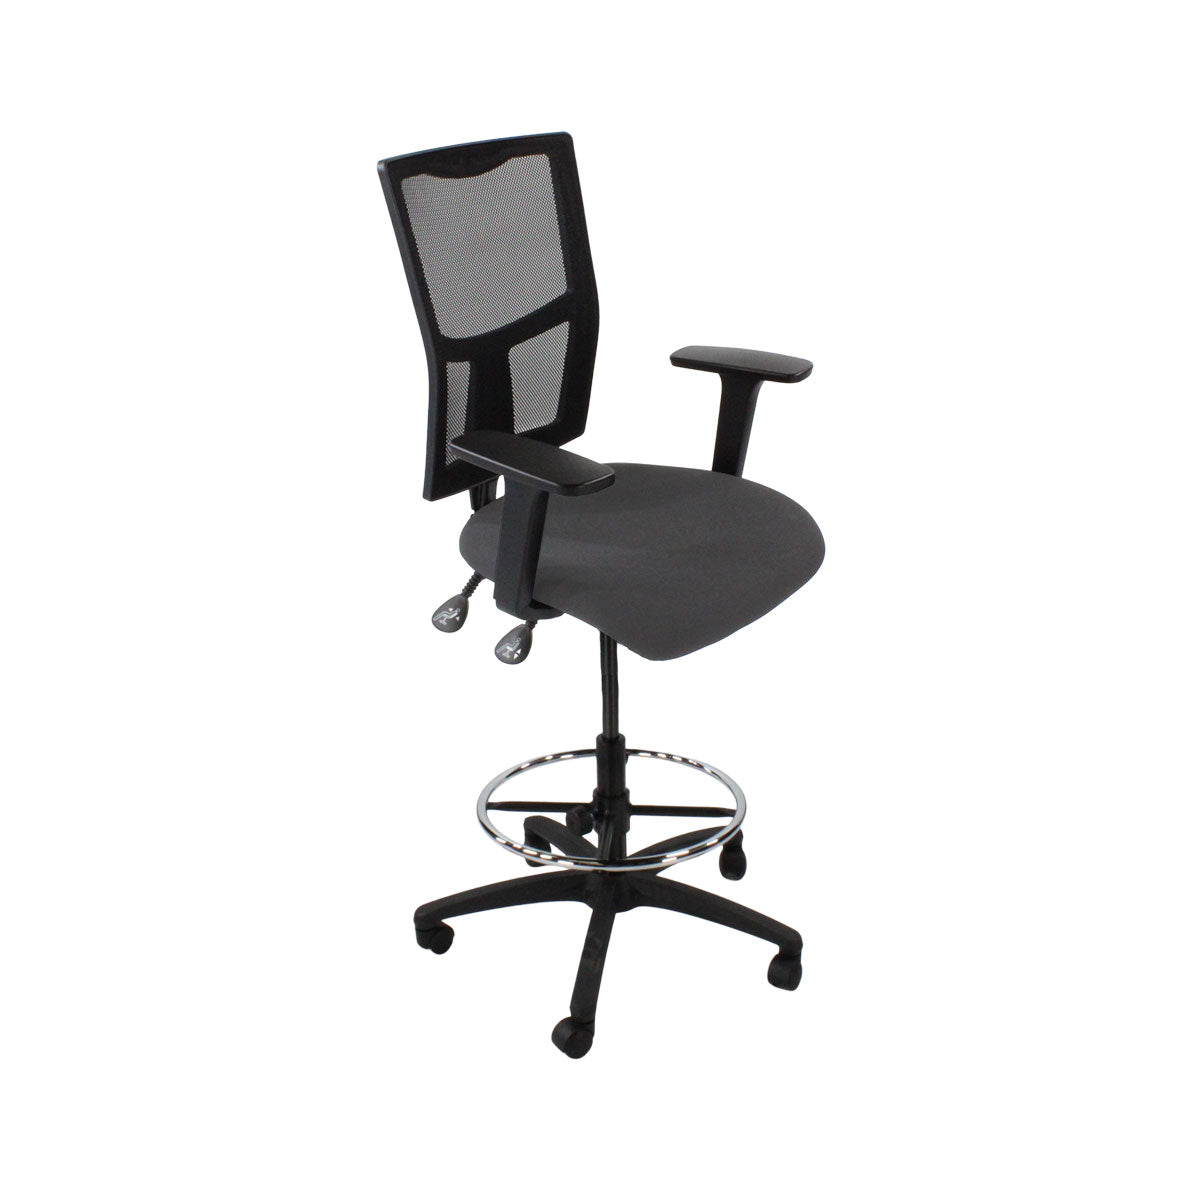 TOC: Ergo 2 Draughtsman Chair in Grey Fabric - Refurbished